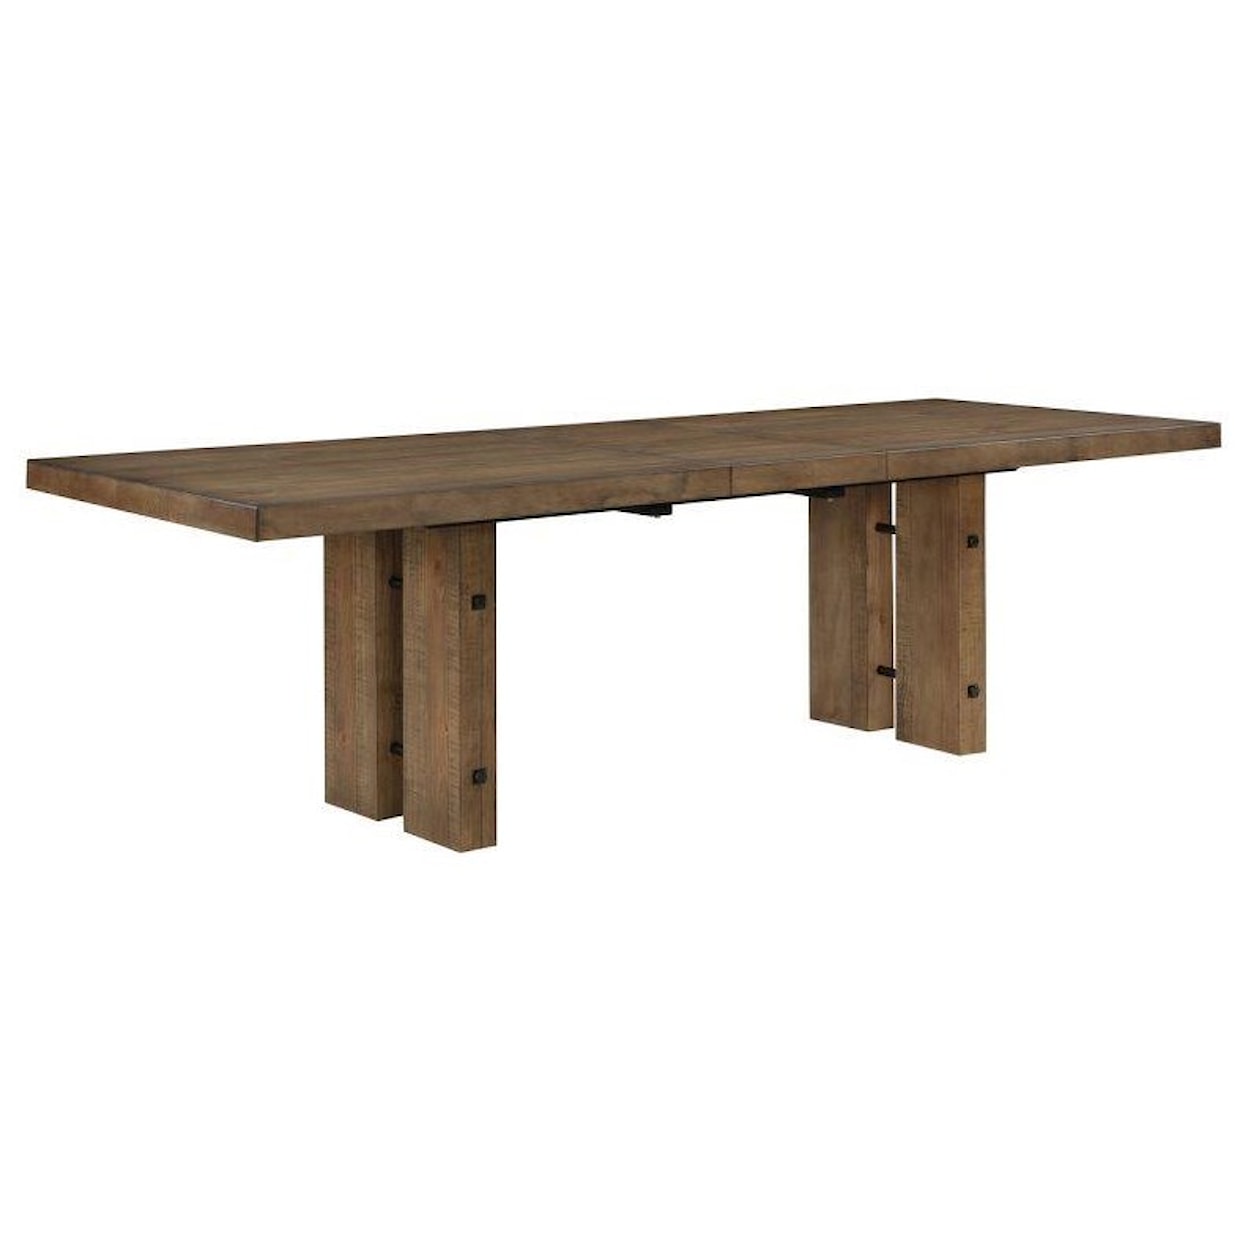 Steve Silver Atmore Dining Table